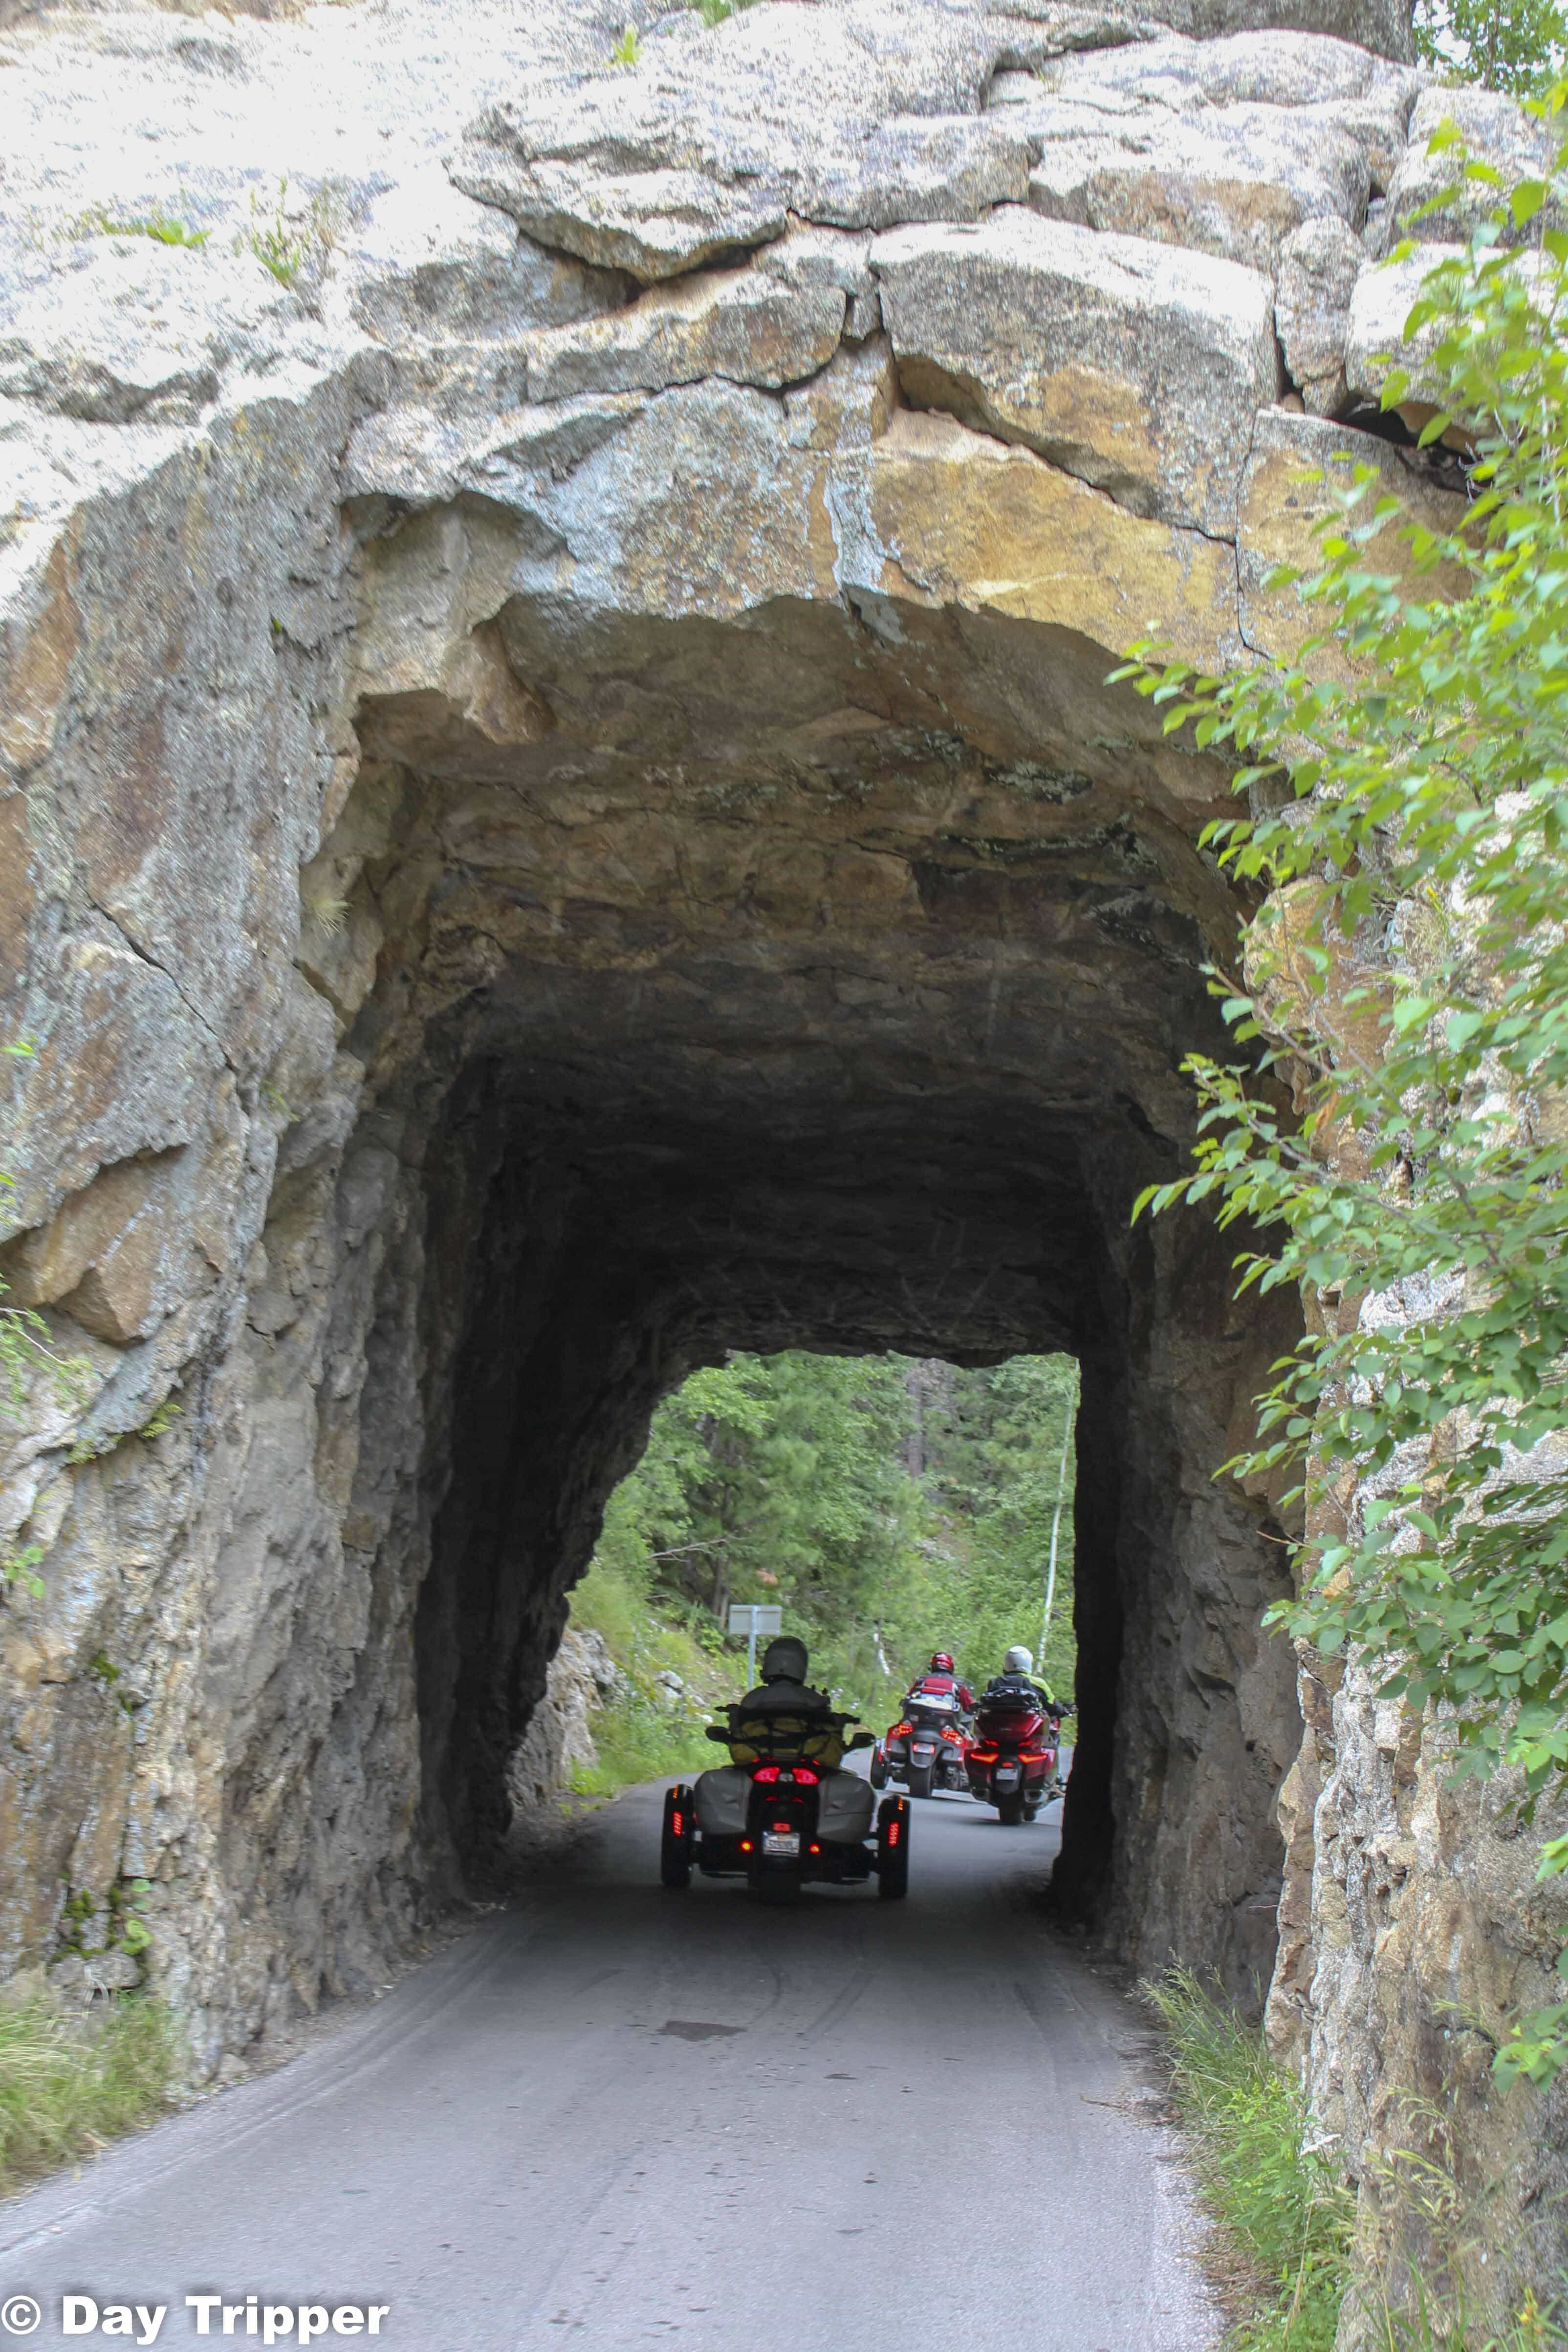 Motorcycles crossing through the tunnels on Needles Highway